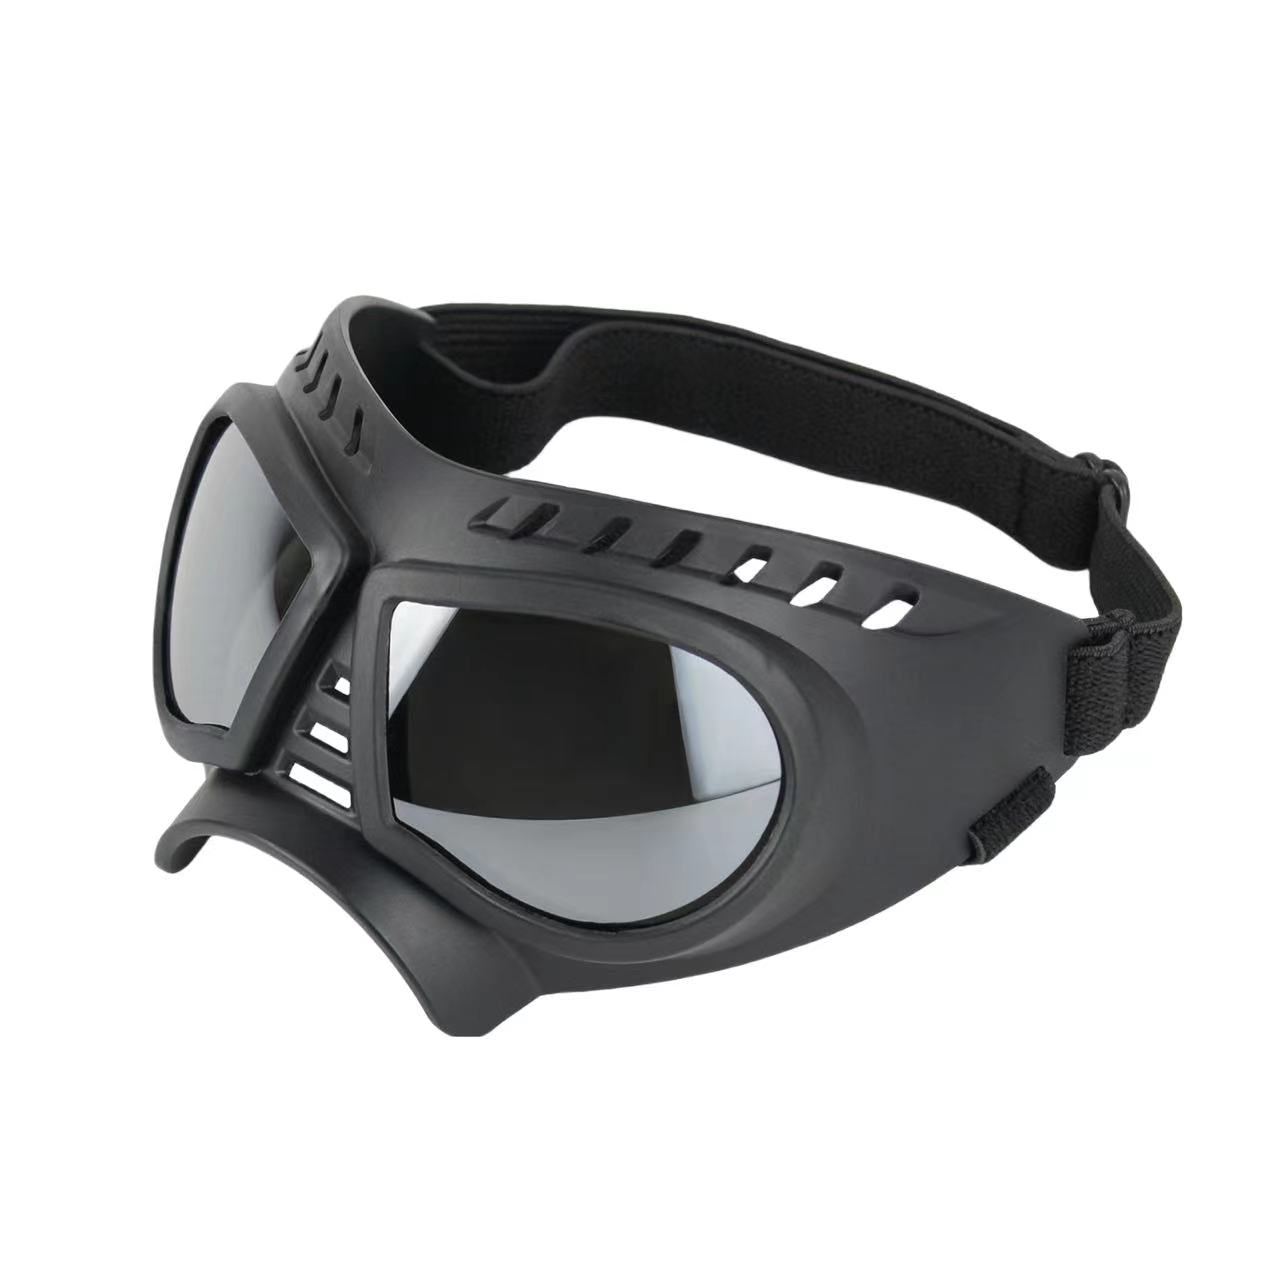 Small Dog Goggles Sunglasses Suitable for Outdoor Ski Drive Ride